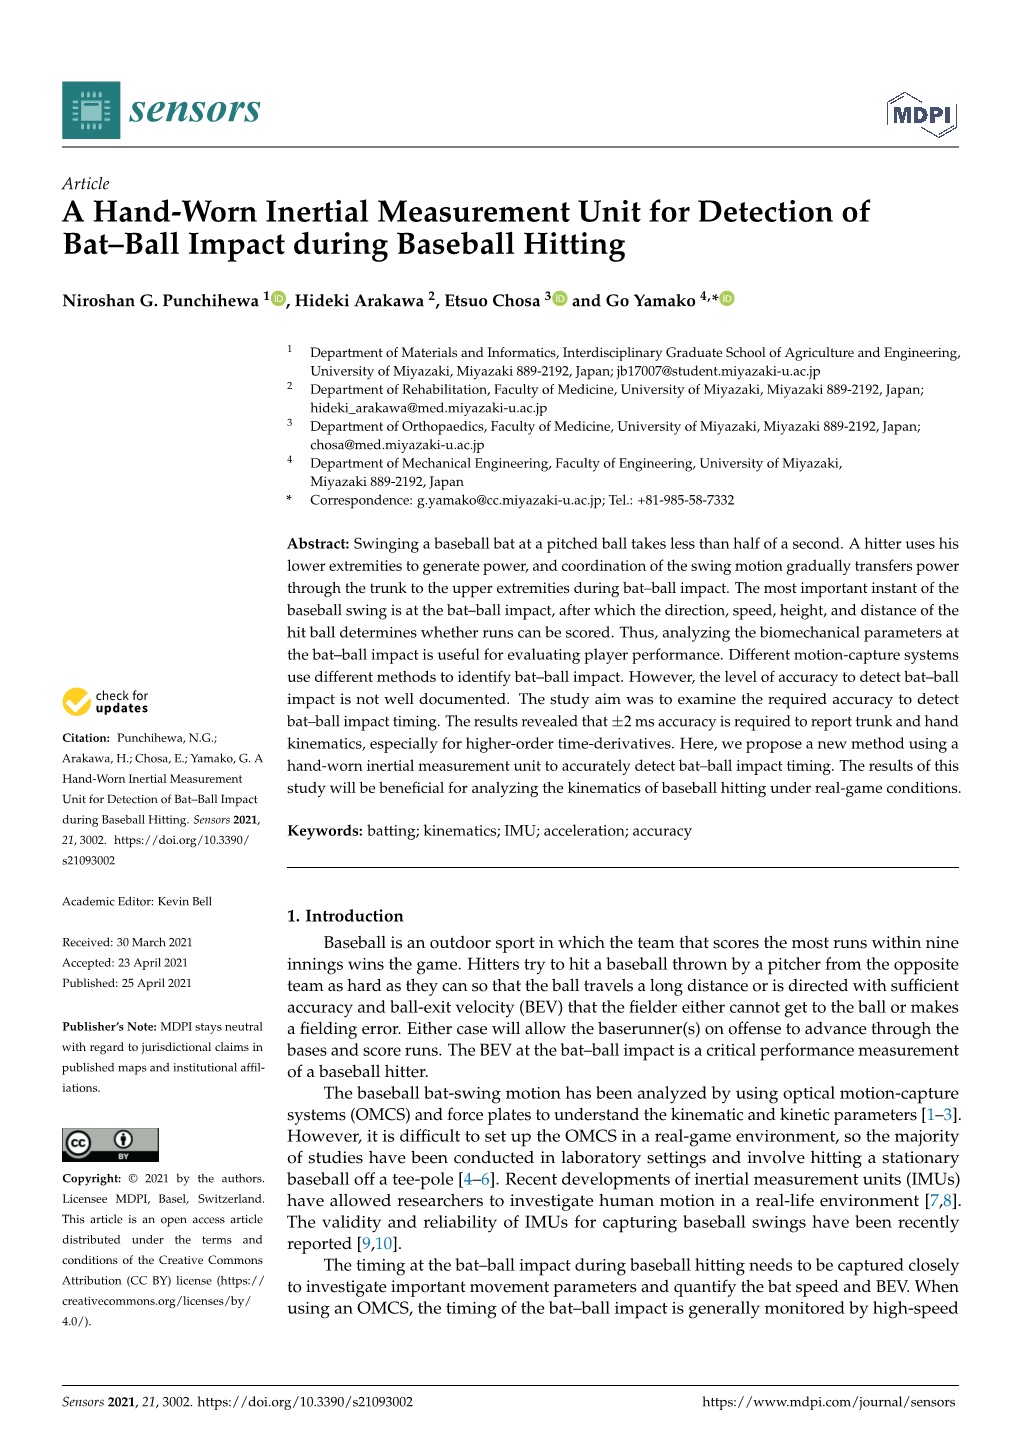 A Hand-Worn Inertial Measurement Unit for Detection of Bat–Ball Impact During Baseball Hitting